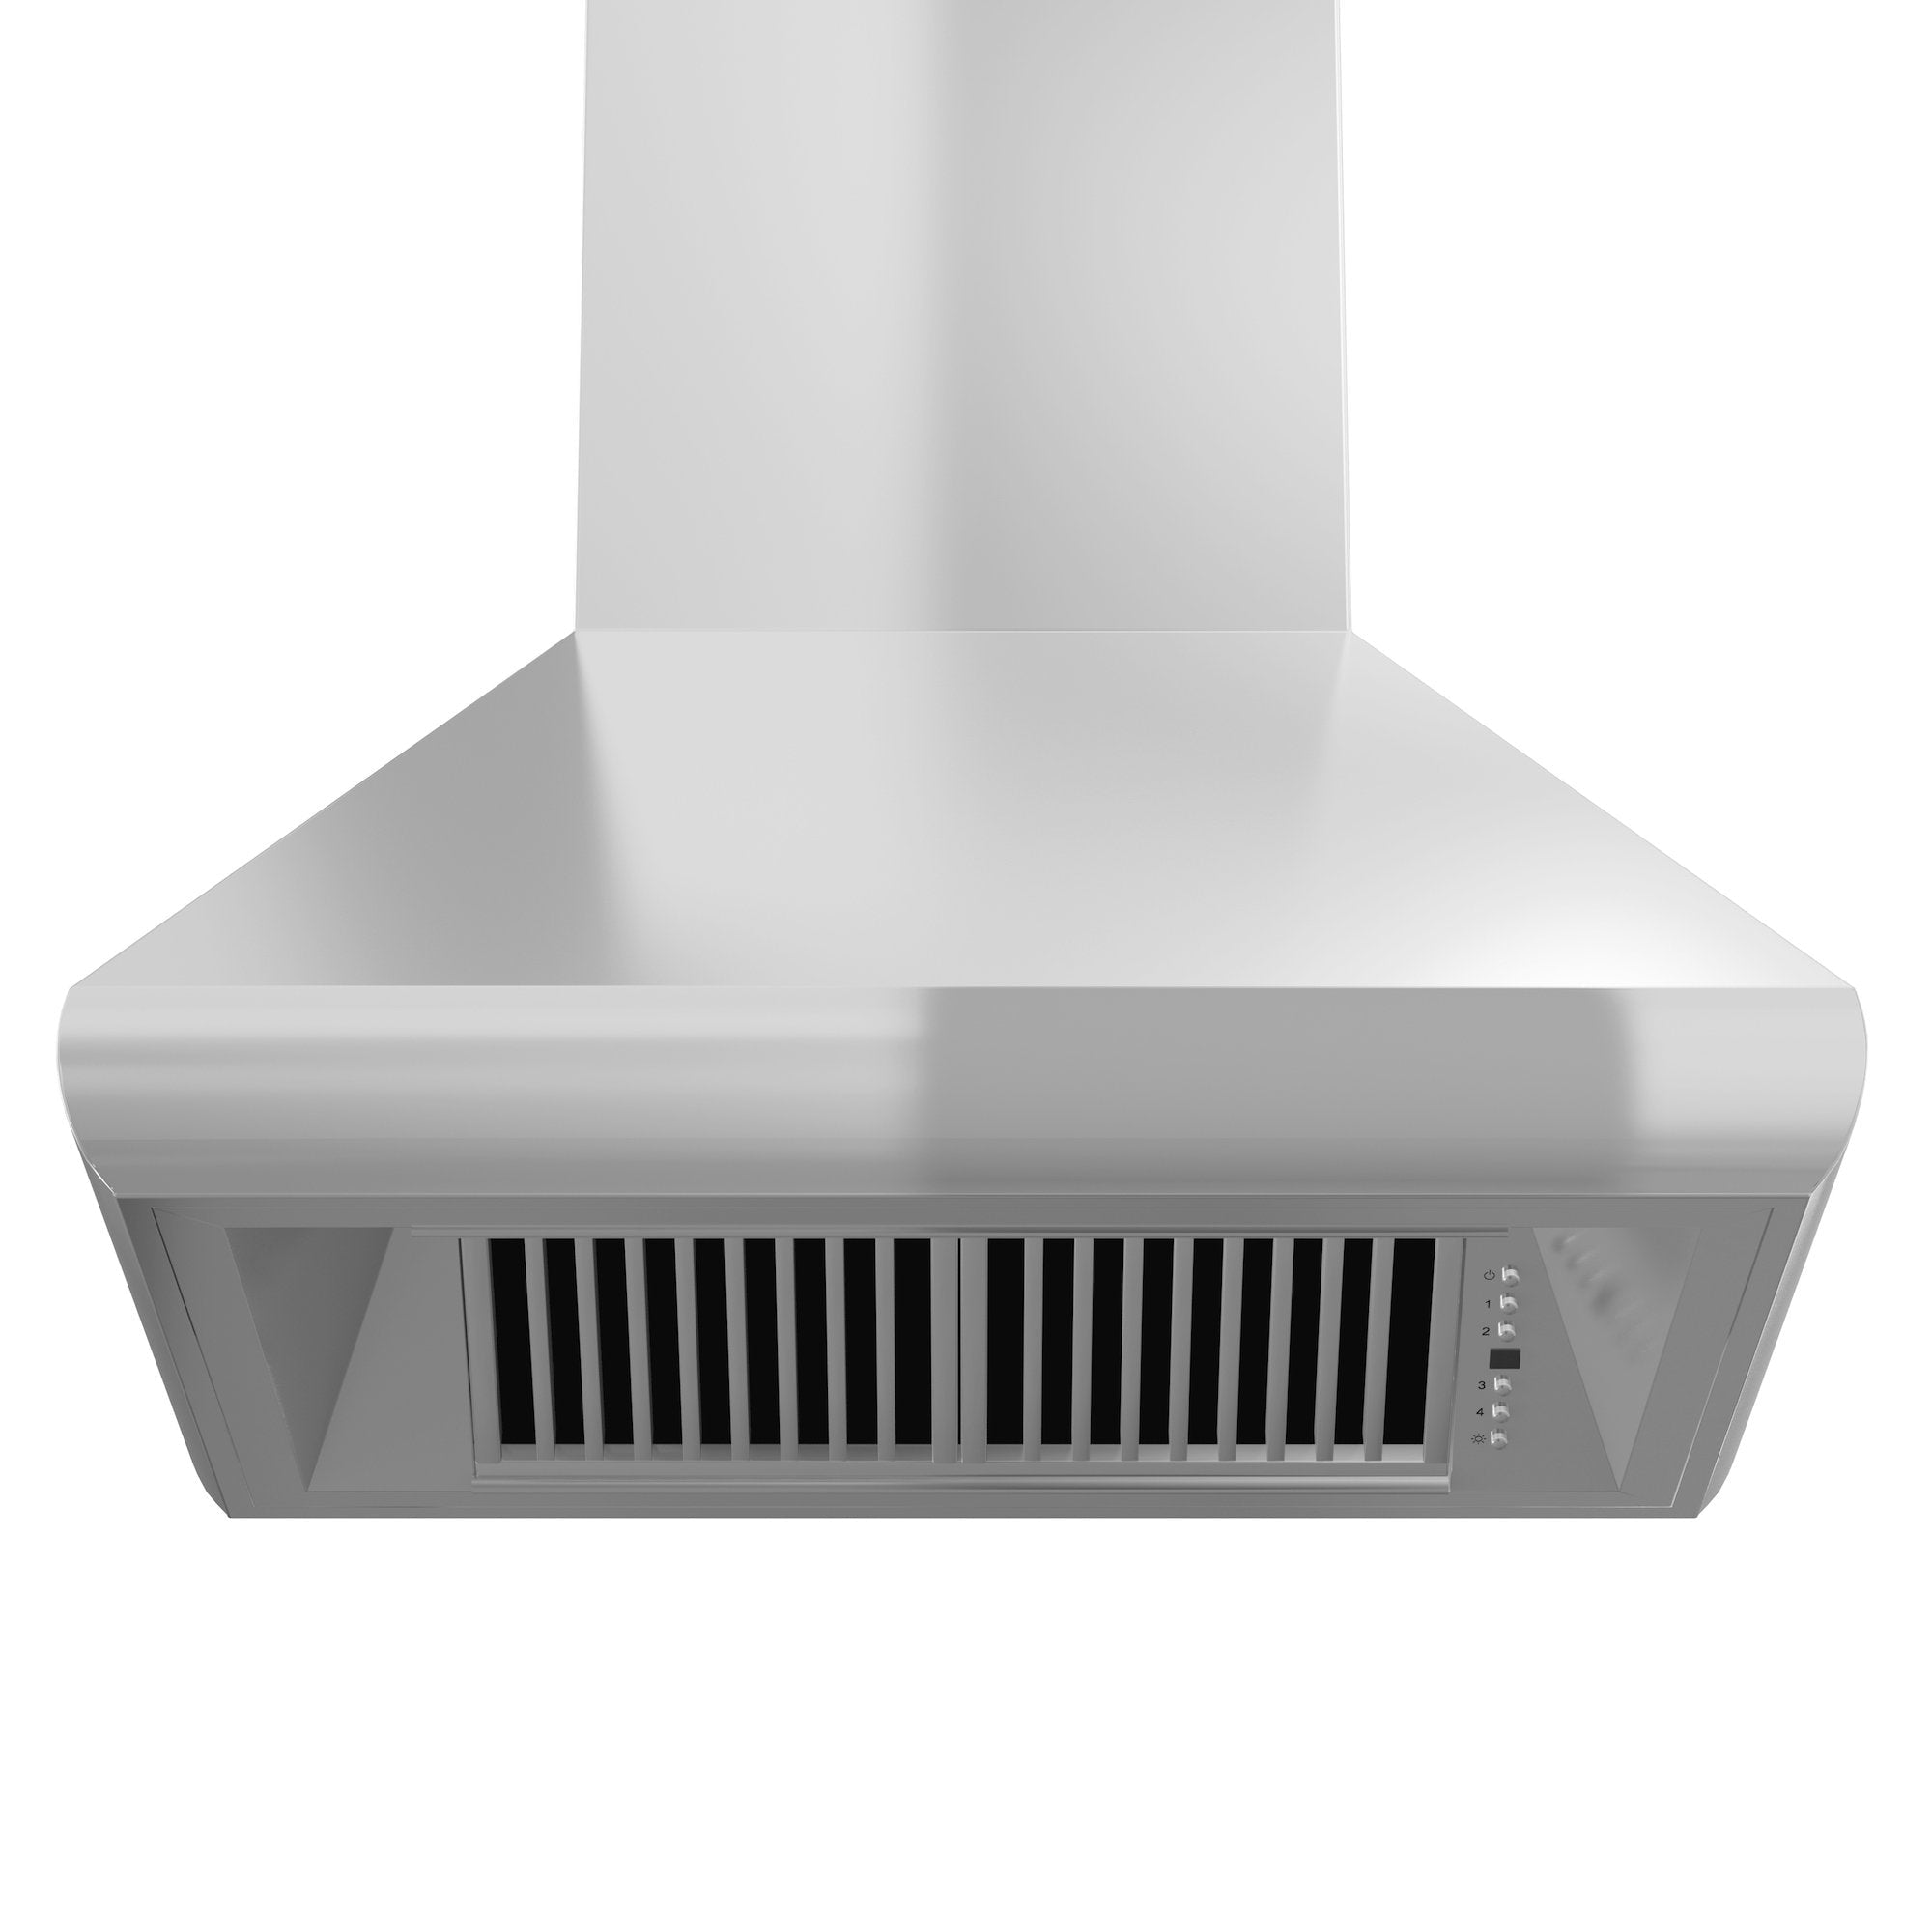 ZLINE Wall Mount Range Hood in Stainless Steel - Includes Remote Blower Options (687-RD/RS) Under View Dishwasher Safe Stainless Steel Baffle Filters and LED Lighting